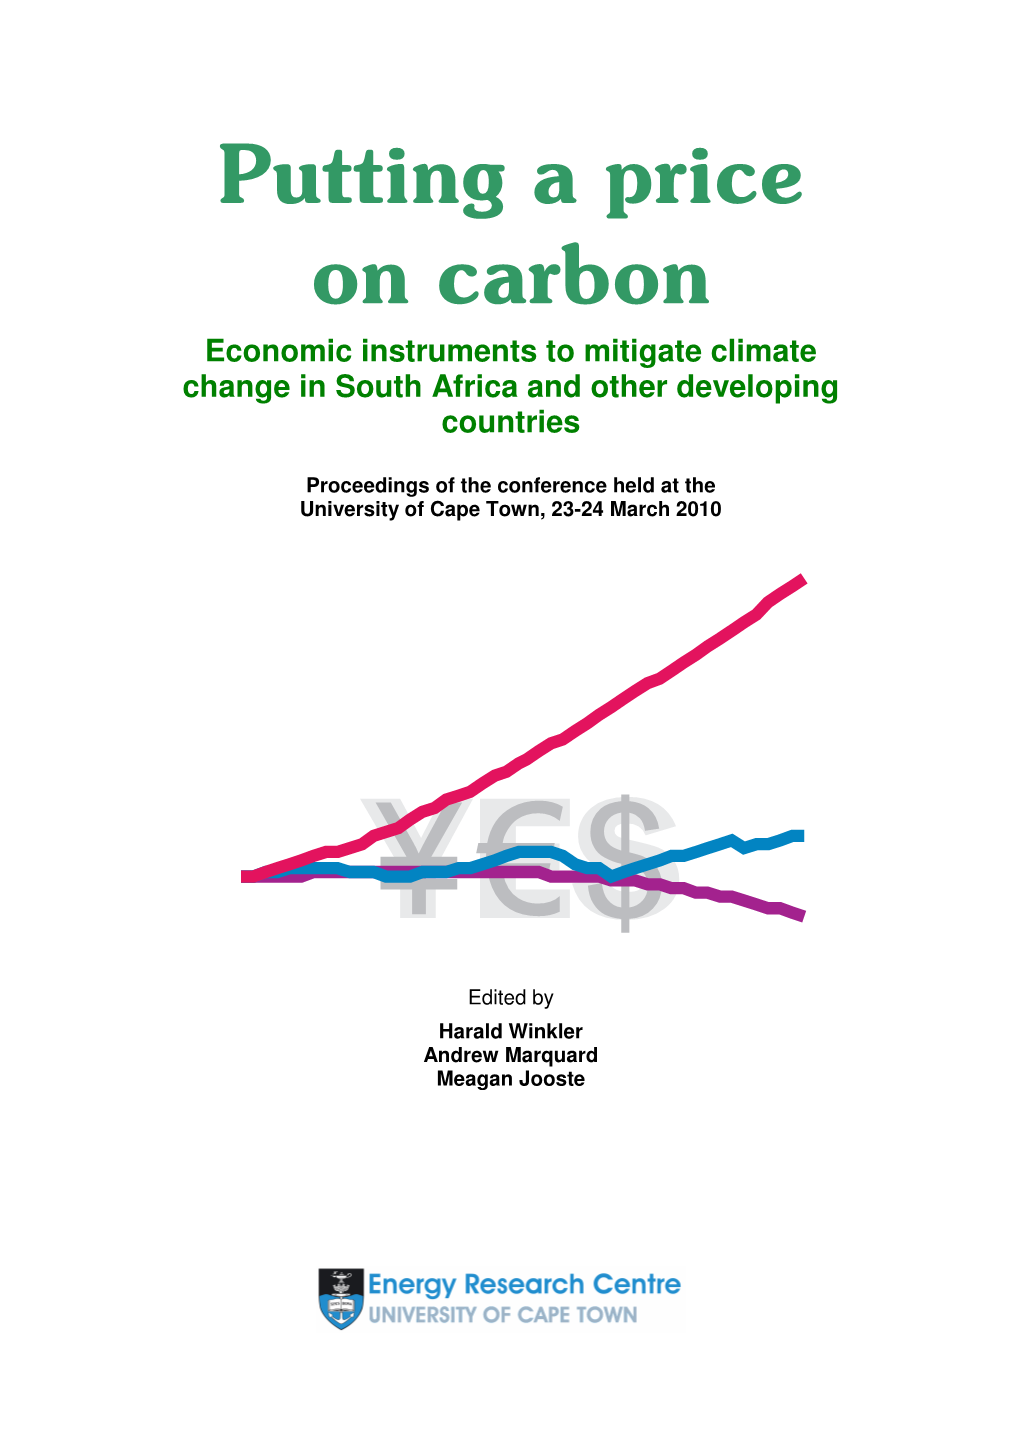 Putting a Price on Carbon Economic Instruments to Mitigate Climate Change in South Africa and Other Developing Countries